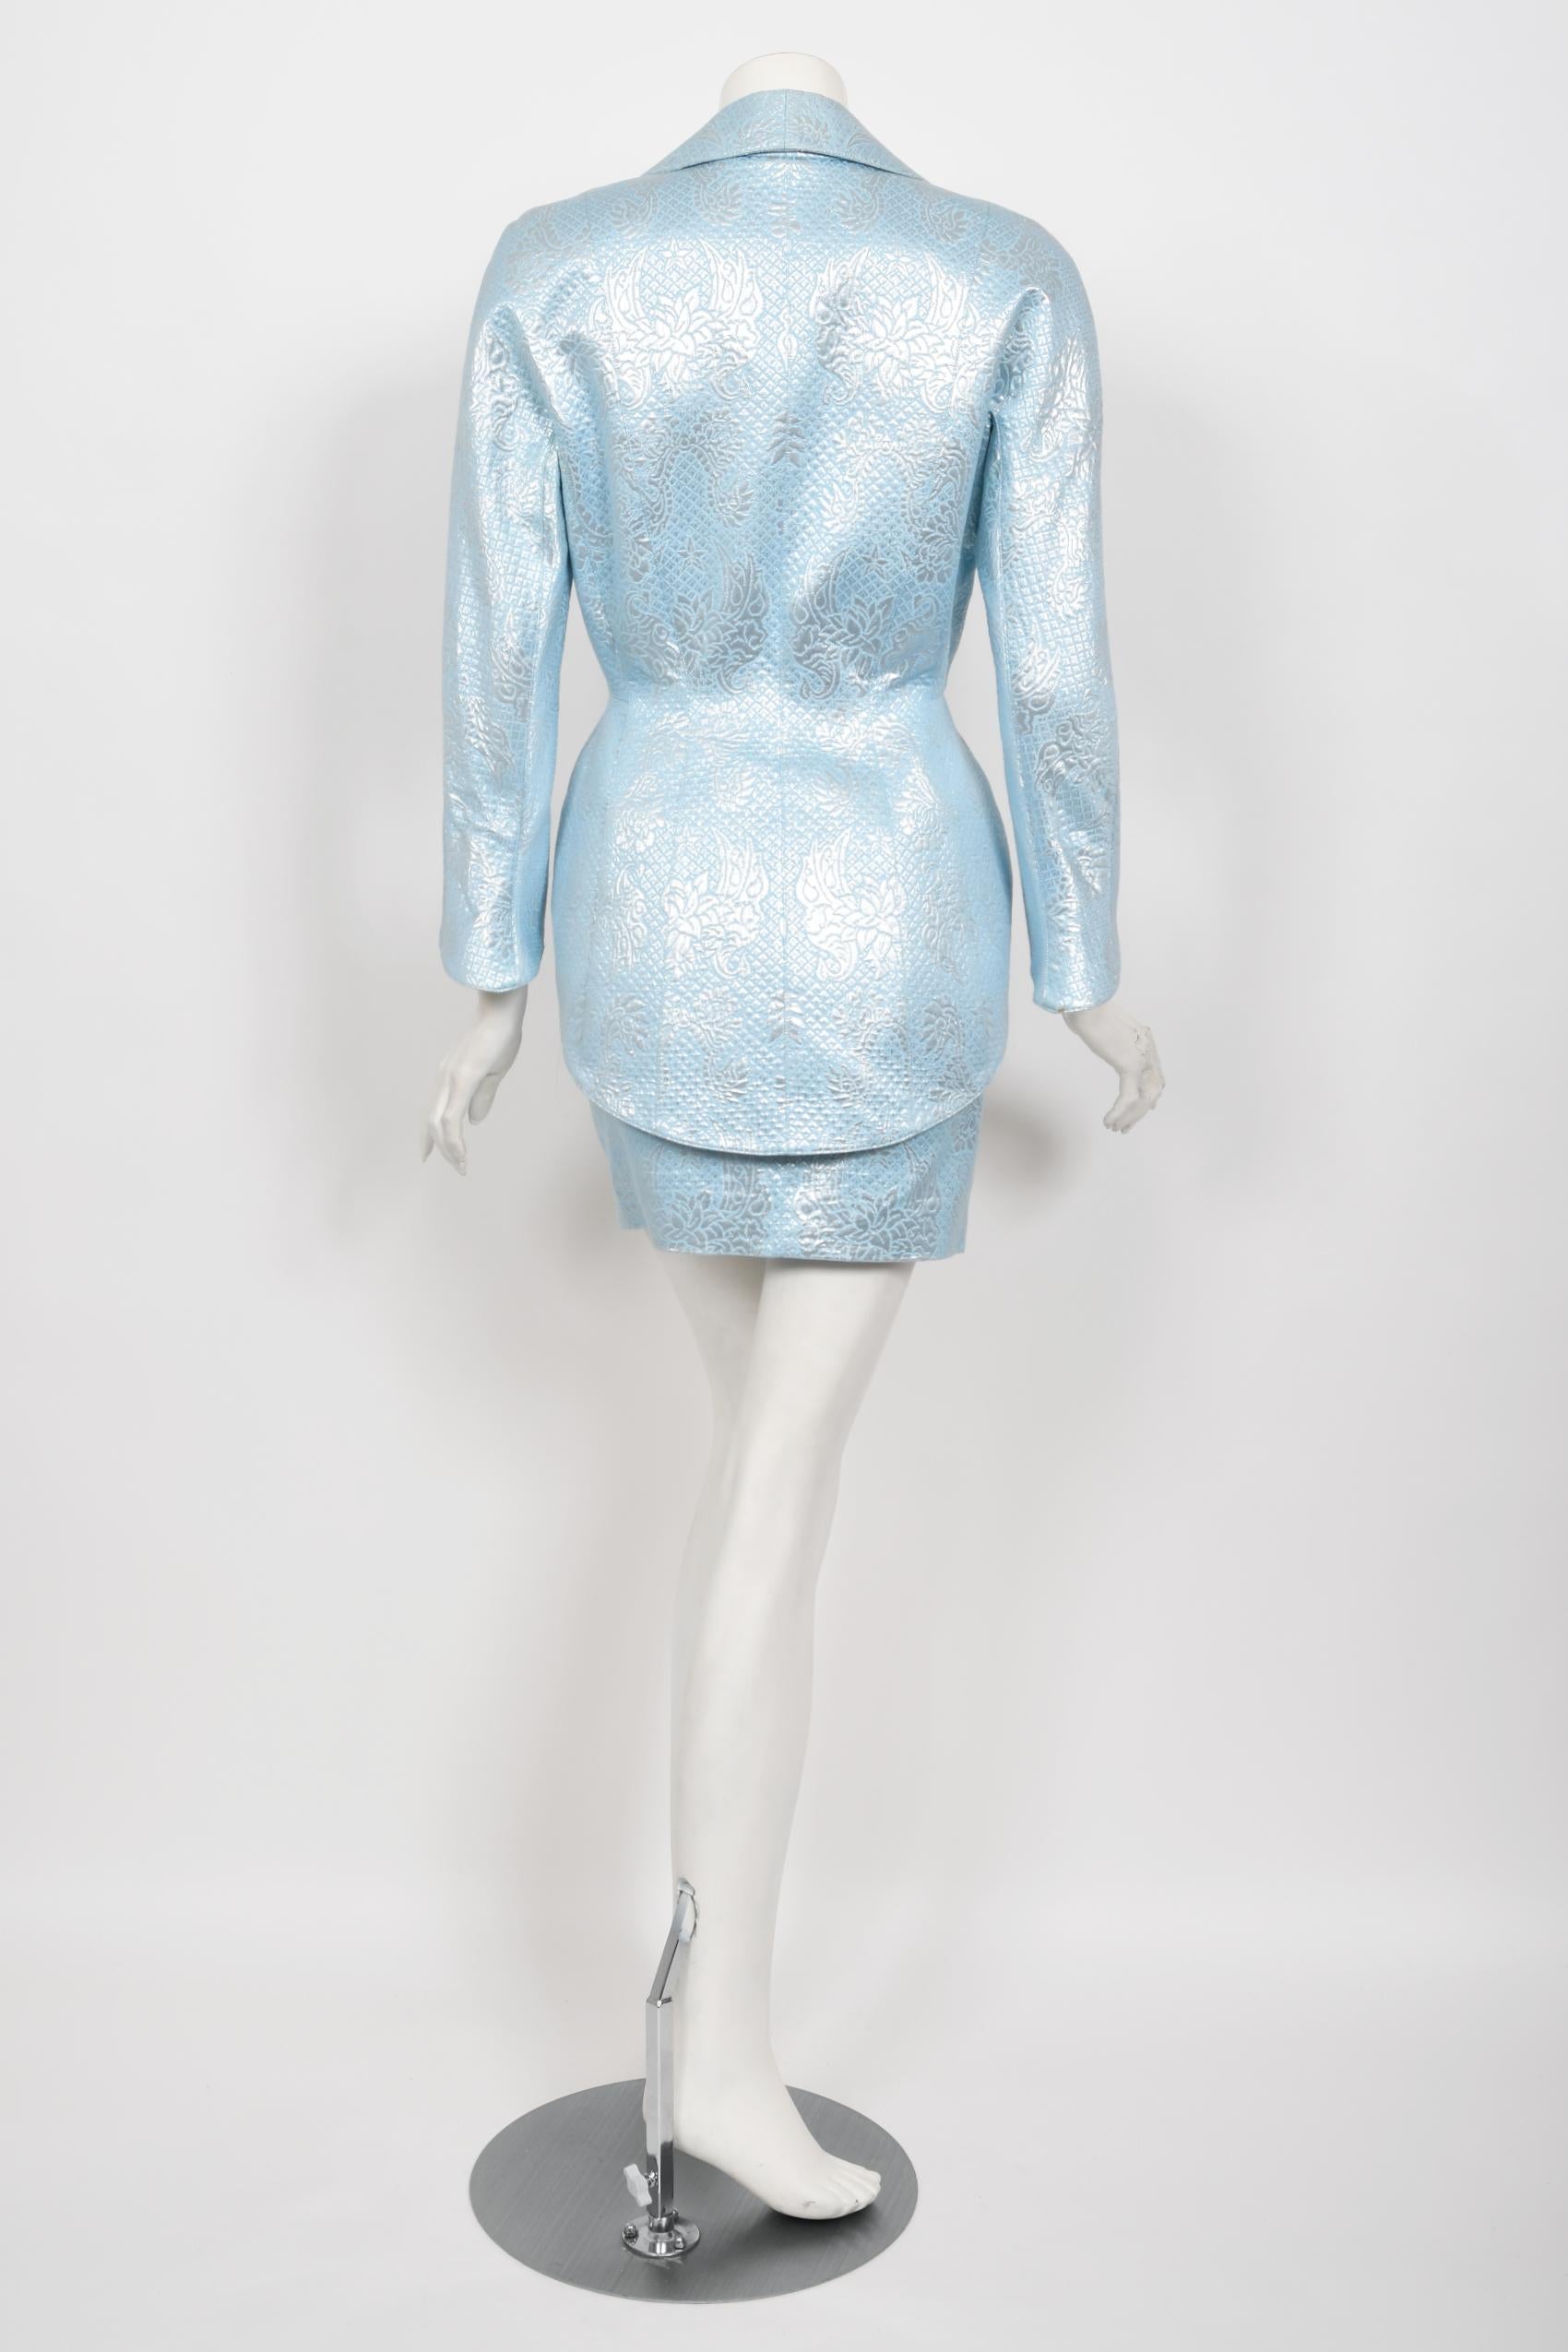 Iconic 1992 Thierry Mugler Couture Metallic Silver Blue Bustier Mini Skirt Suit 11